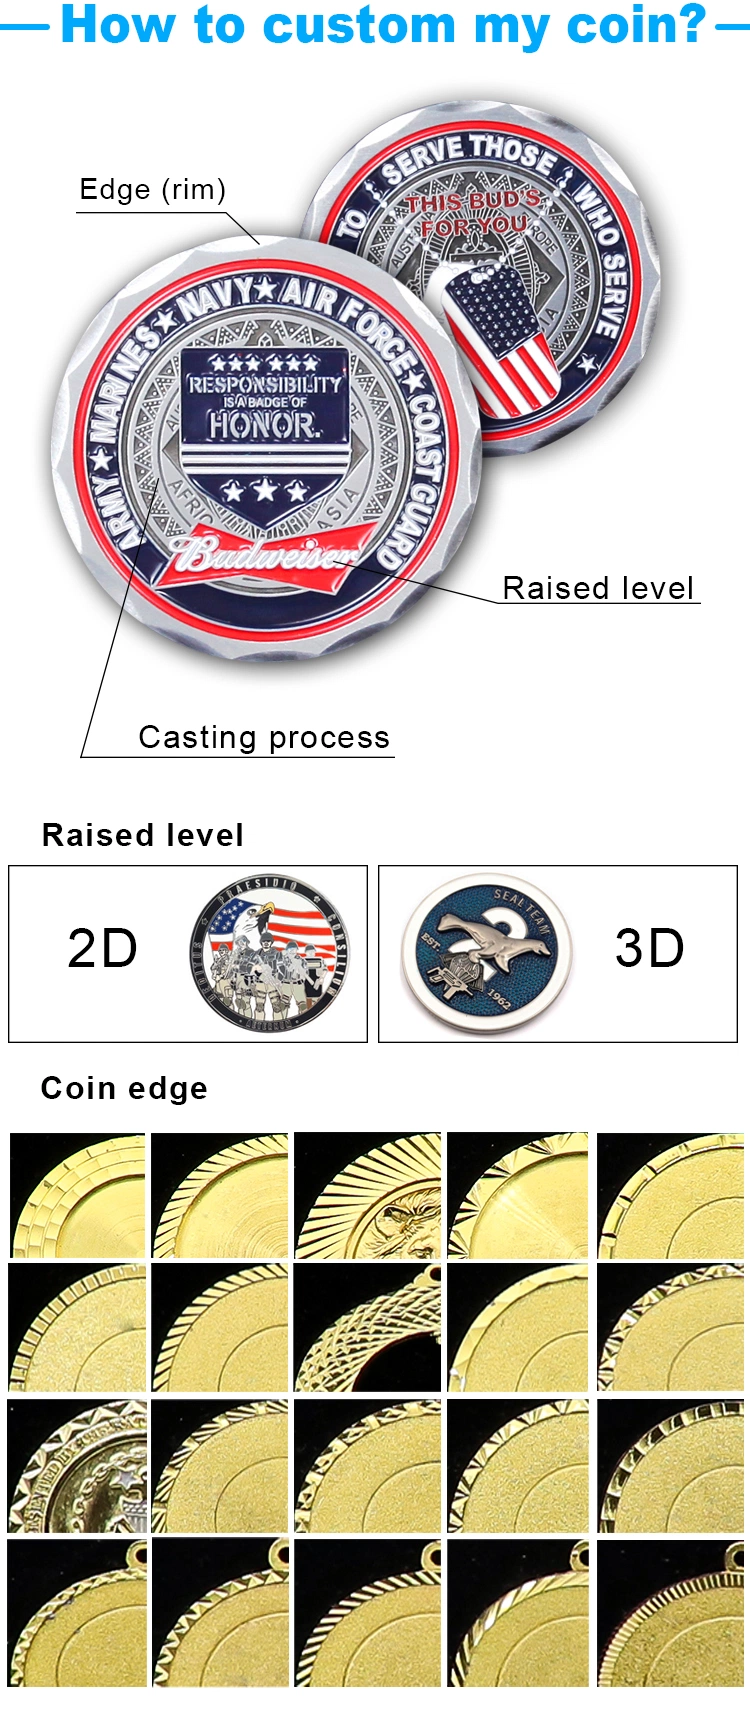 Multi Religious Multifunction Useful Bottle Opener Enamel Zinc Alloy Metal Challenge Coins High Quality Steel Usn Military Souvenir Coins for Sale